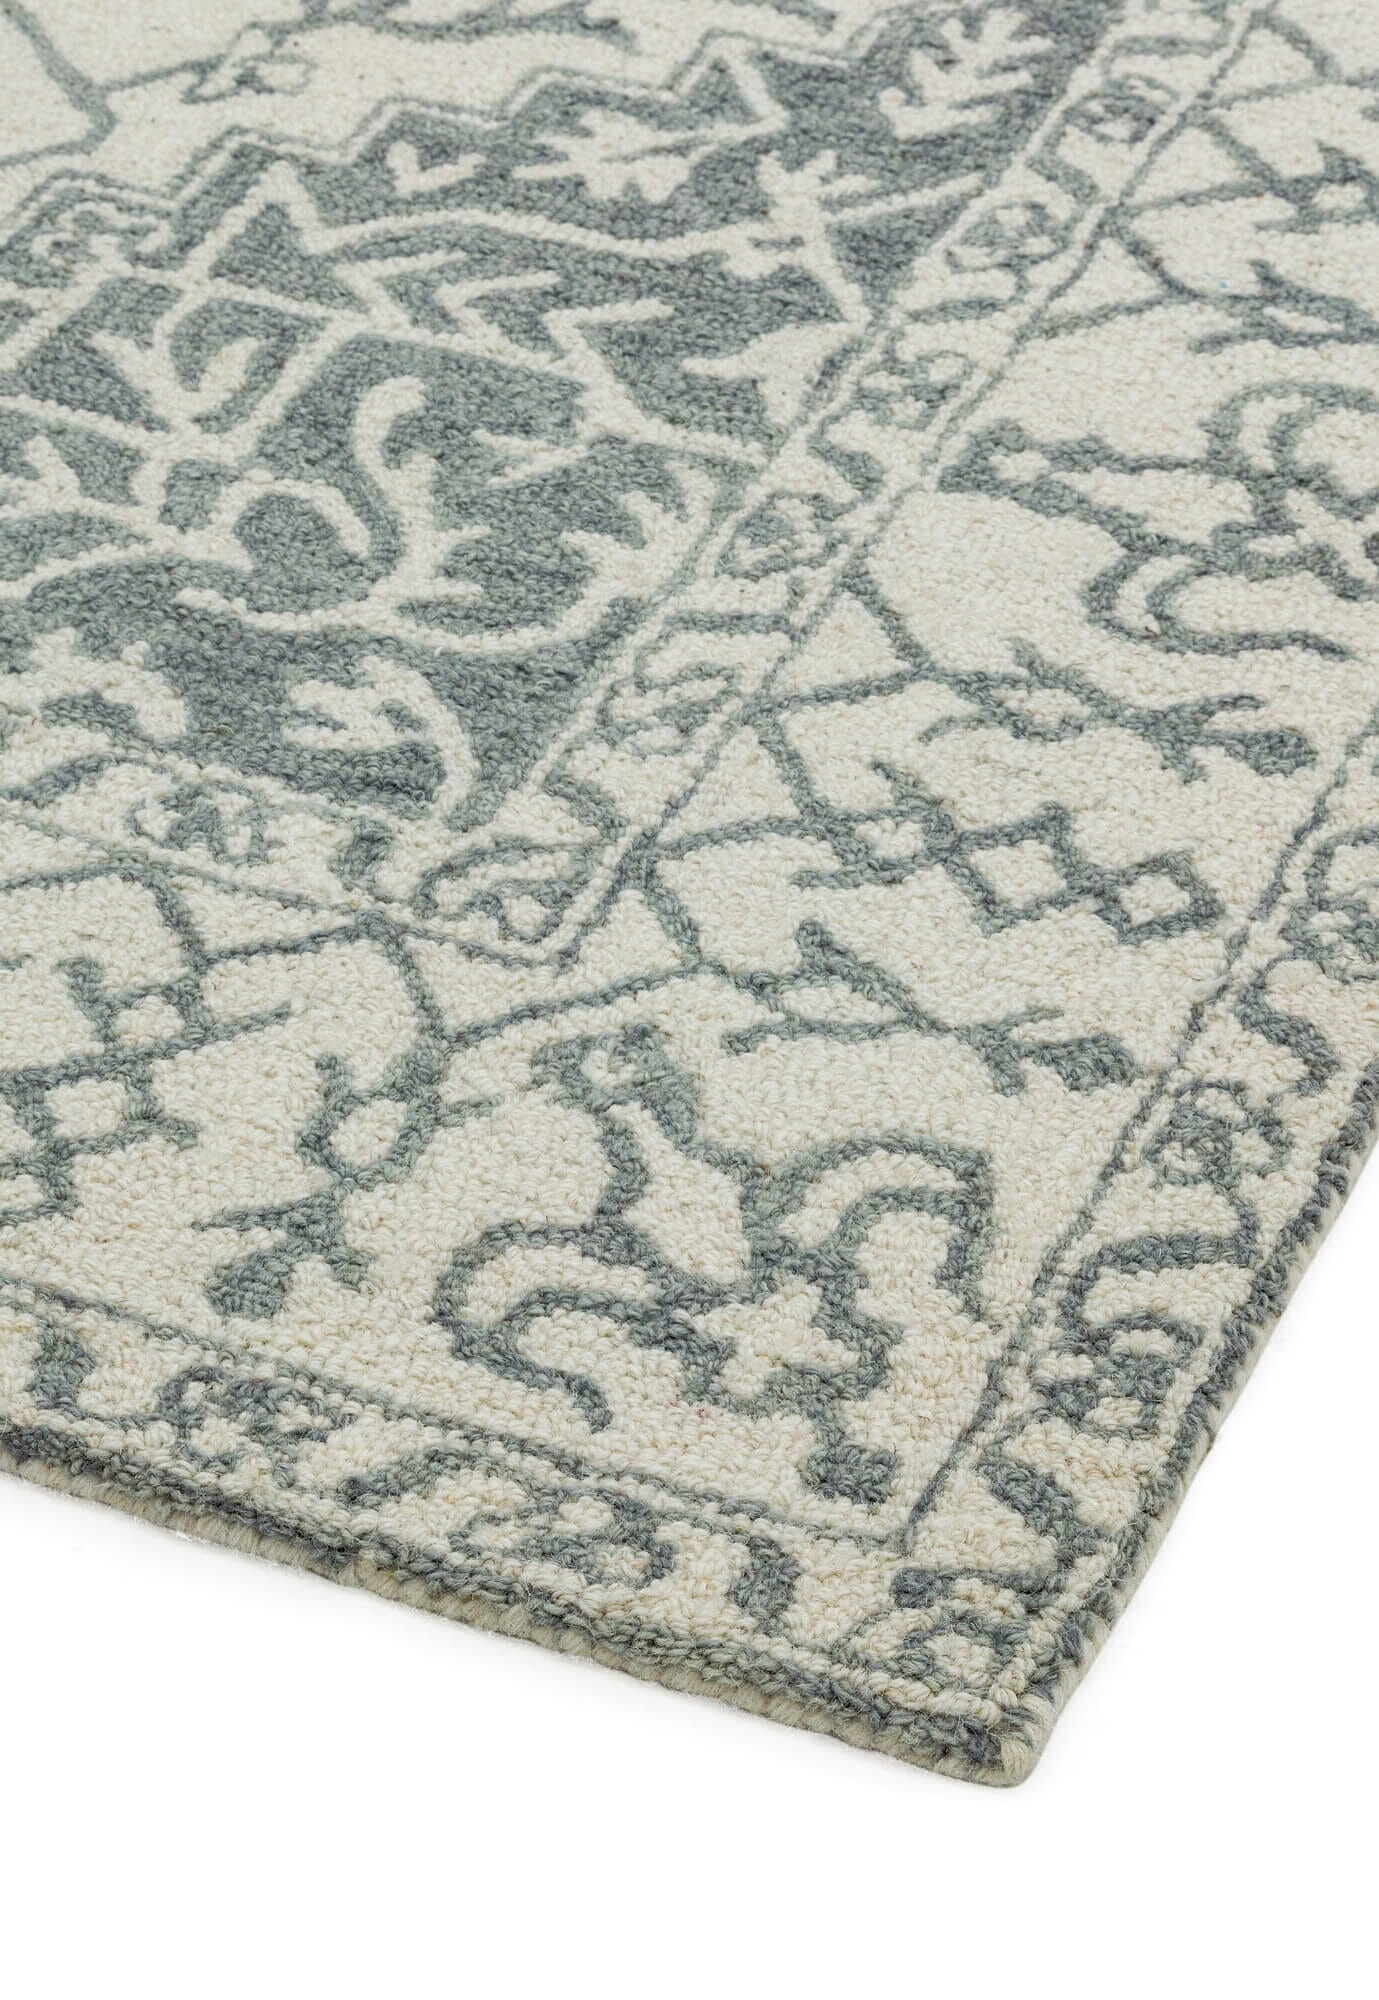  Asiatic Carpets-Asiatic Carpets Bronte Fine Loop Hand Tufted Rug Silver Grey - 200 x 290cm-Beige, Natural 445 